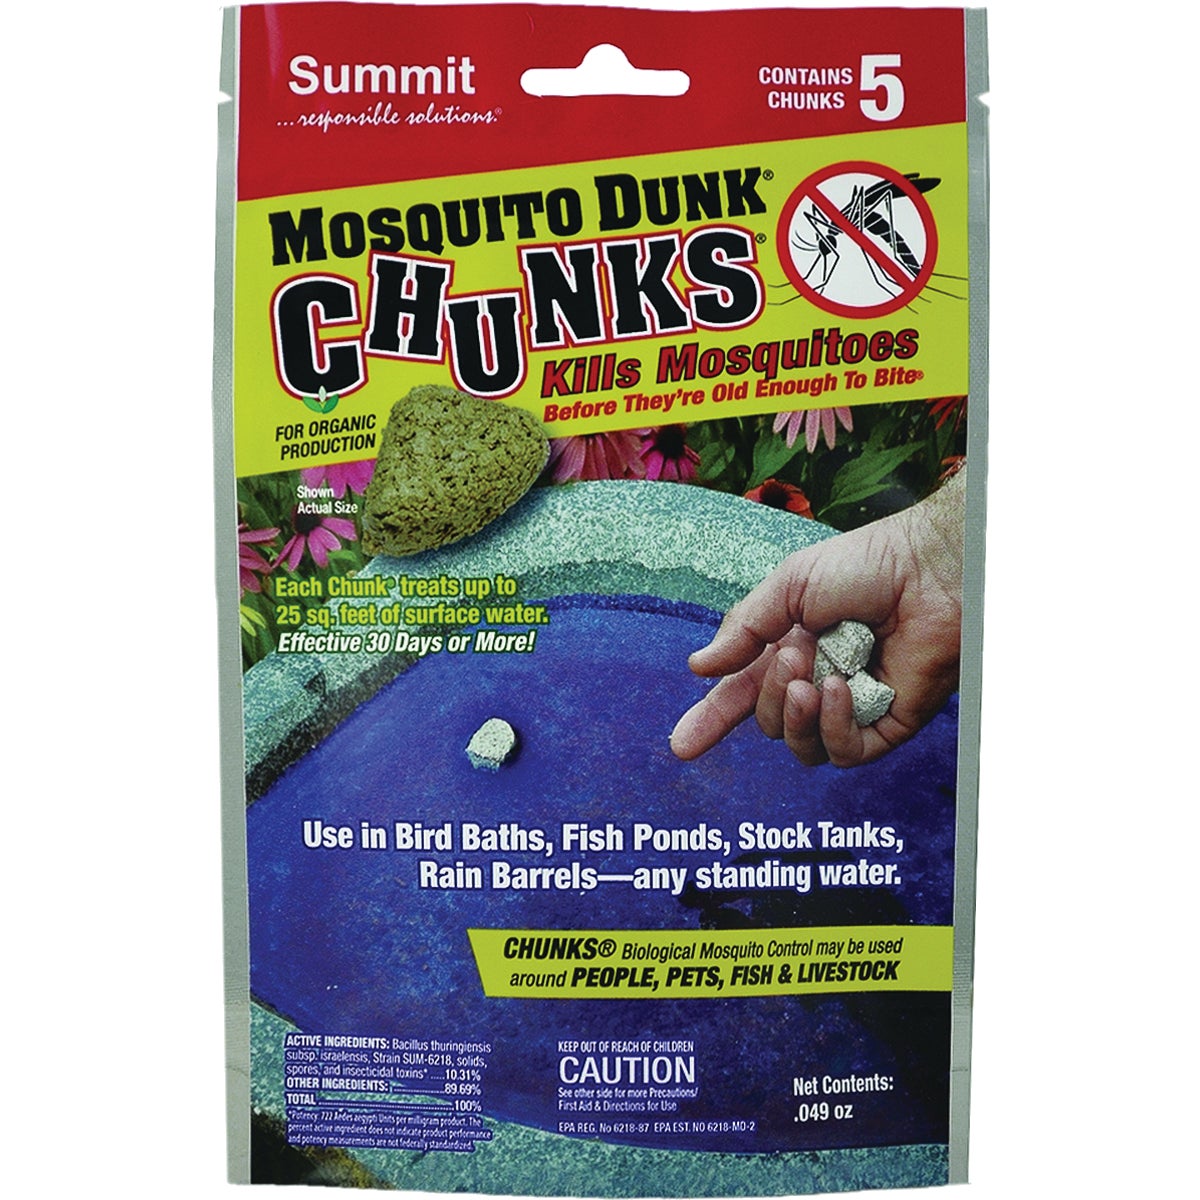 Mosquito Dunks Chunks Ready To Use Chunk Mosquito Killer (5-Pack)